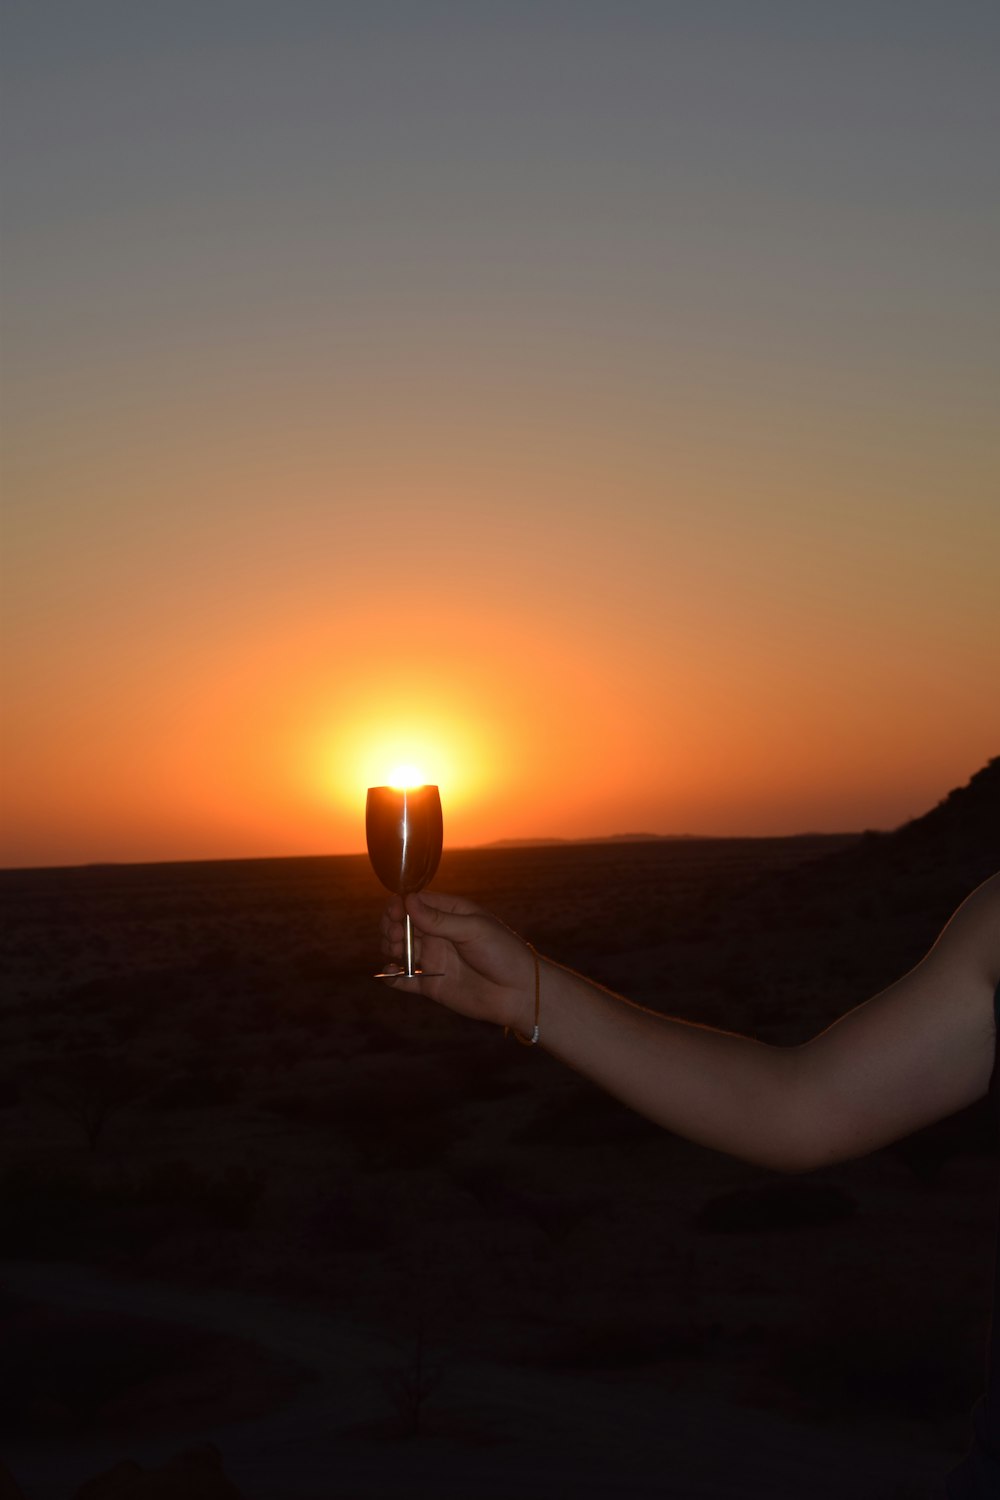 person holding a wine glass during sunset